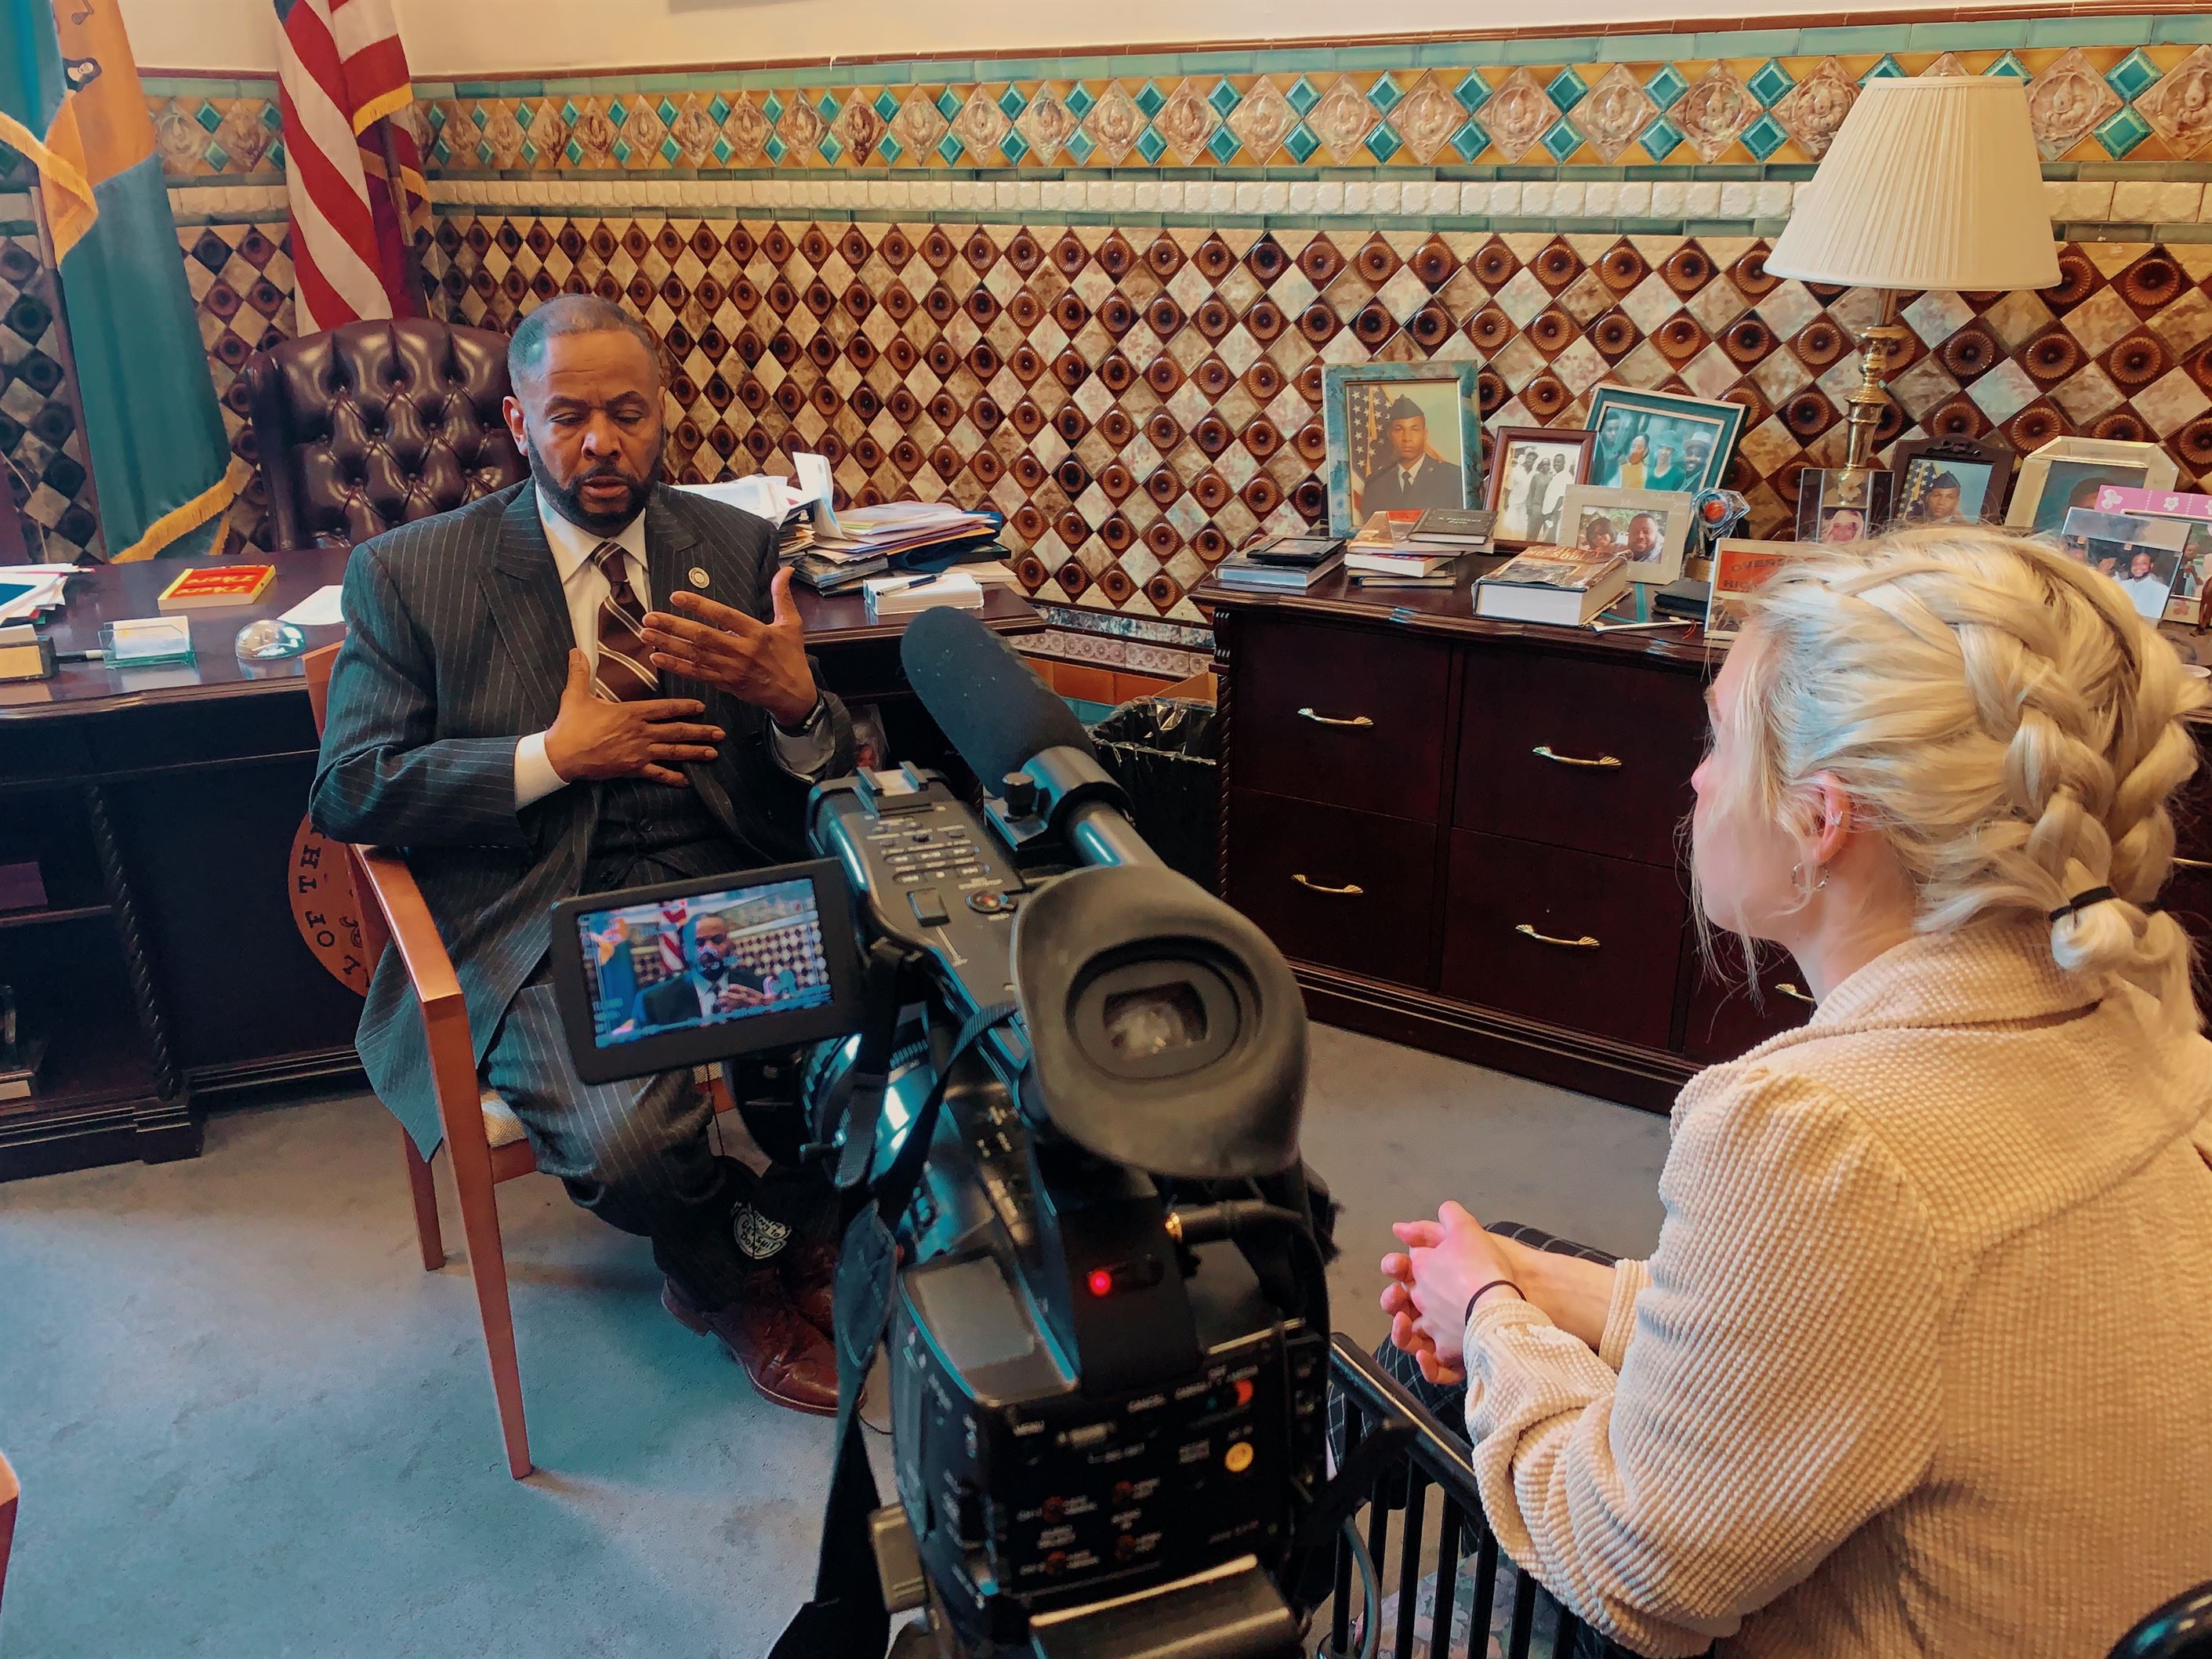 Robertson interviews the Councilman of Philadelphia for her documentary film on juvenile justice. Photo courtesy of Mackenzie Robertson